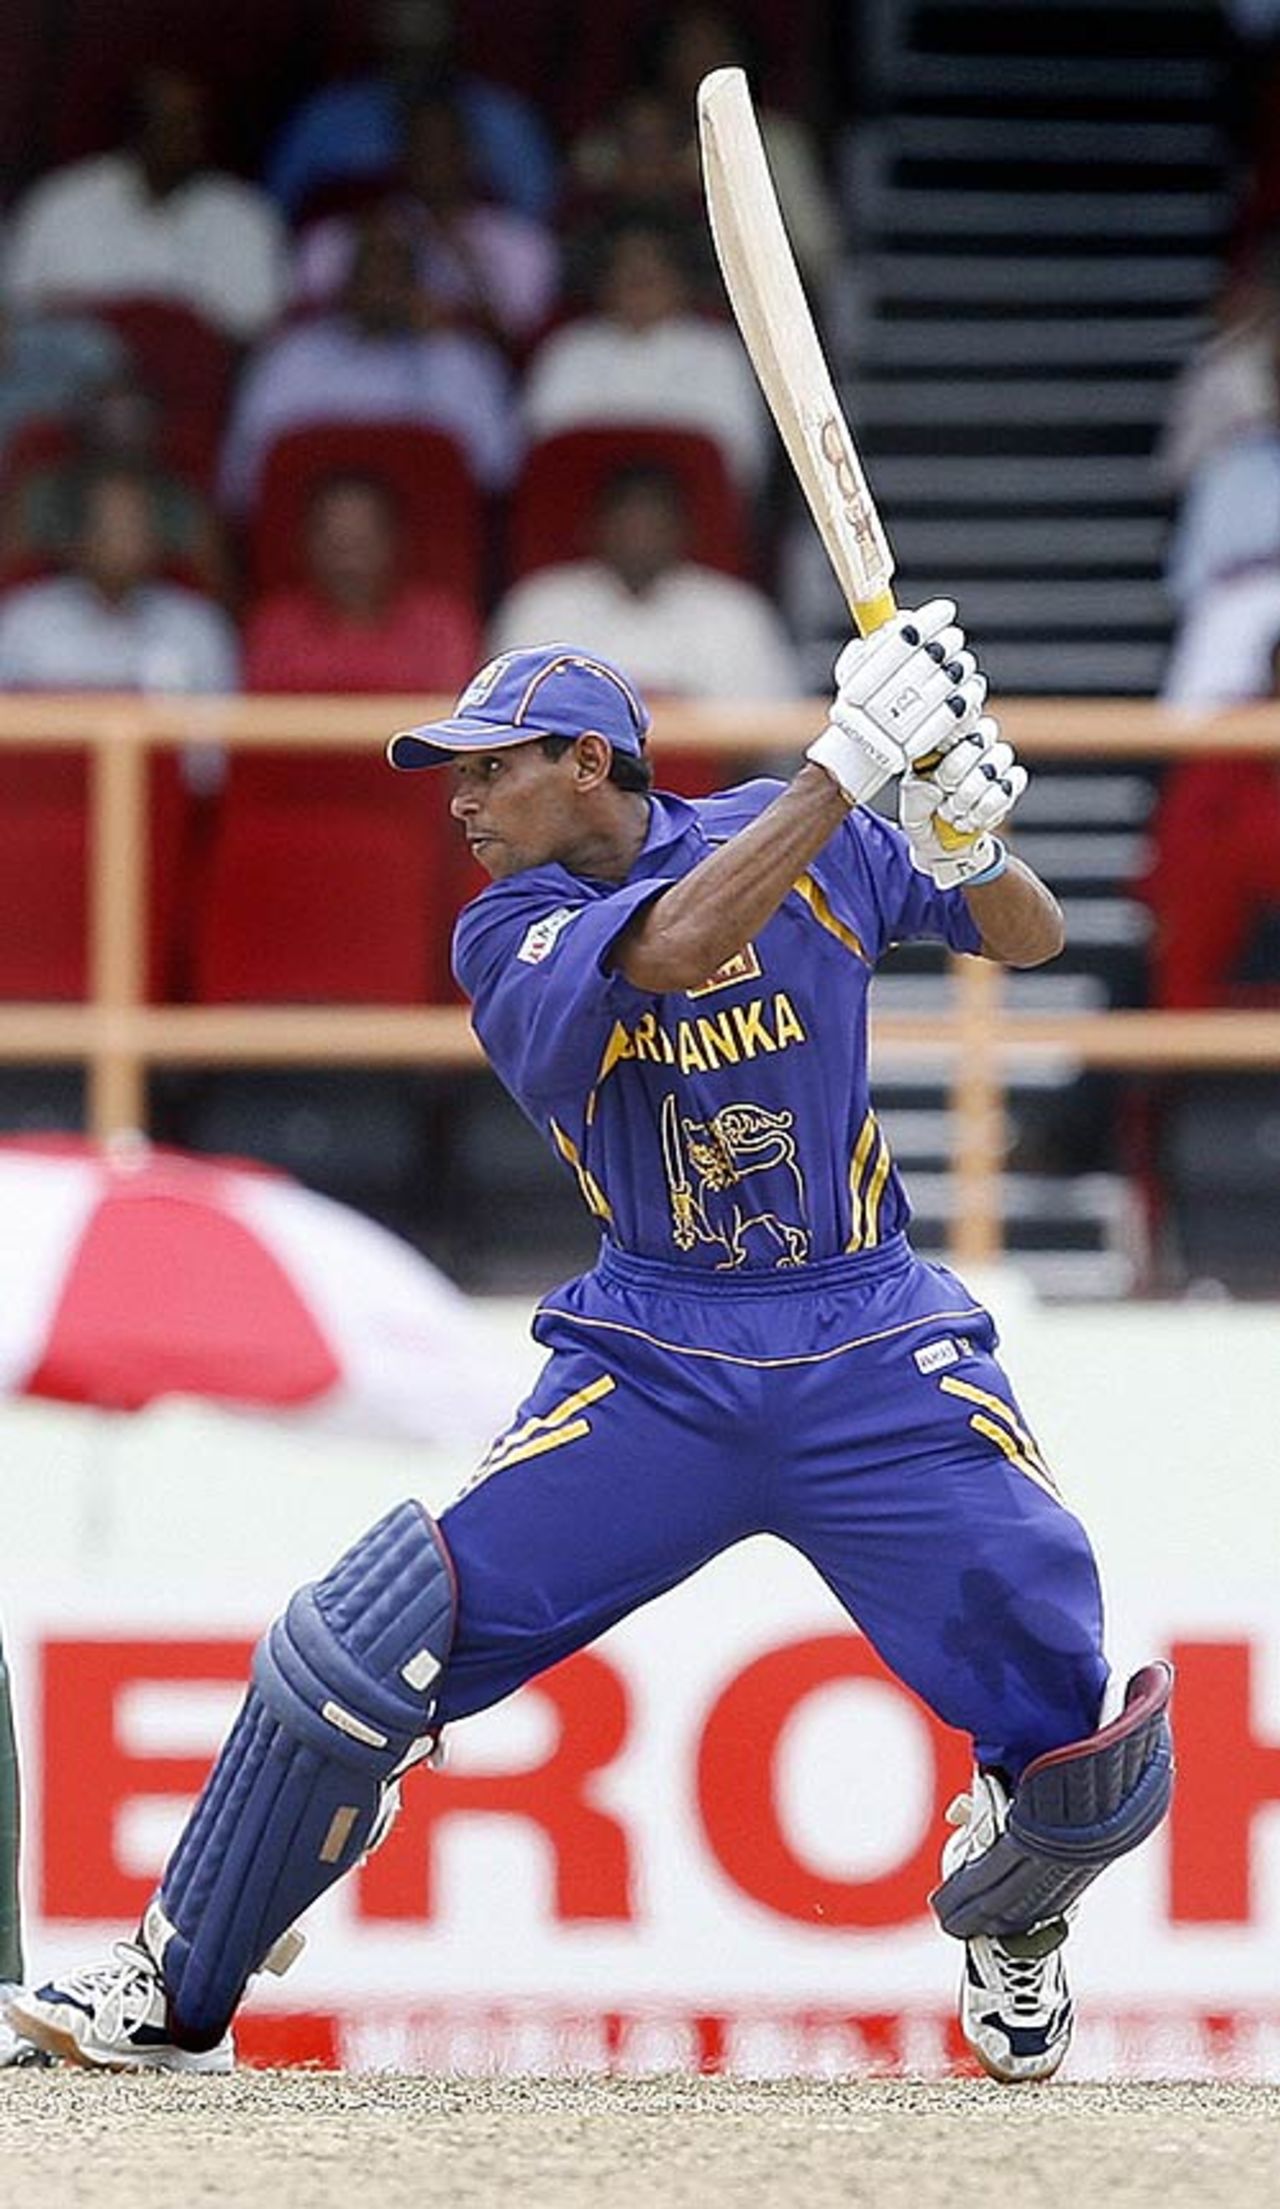 Tillakaratne Dilshan cuts on his way to 58, South Africa v Sri Lanka, Super Eights, Guyana, March 28, 2007